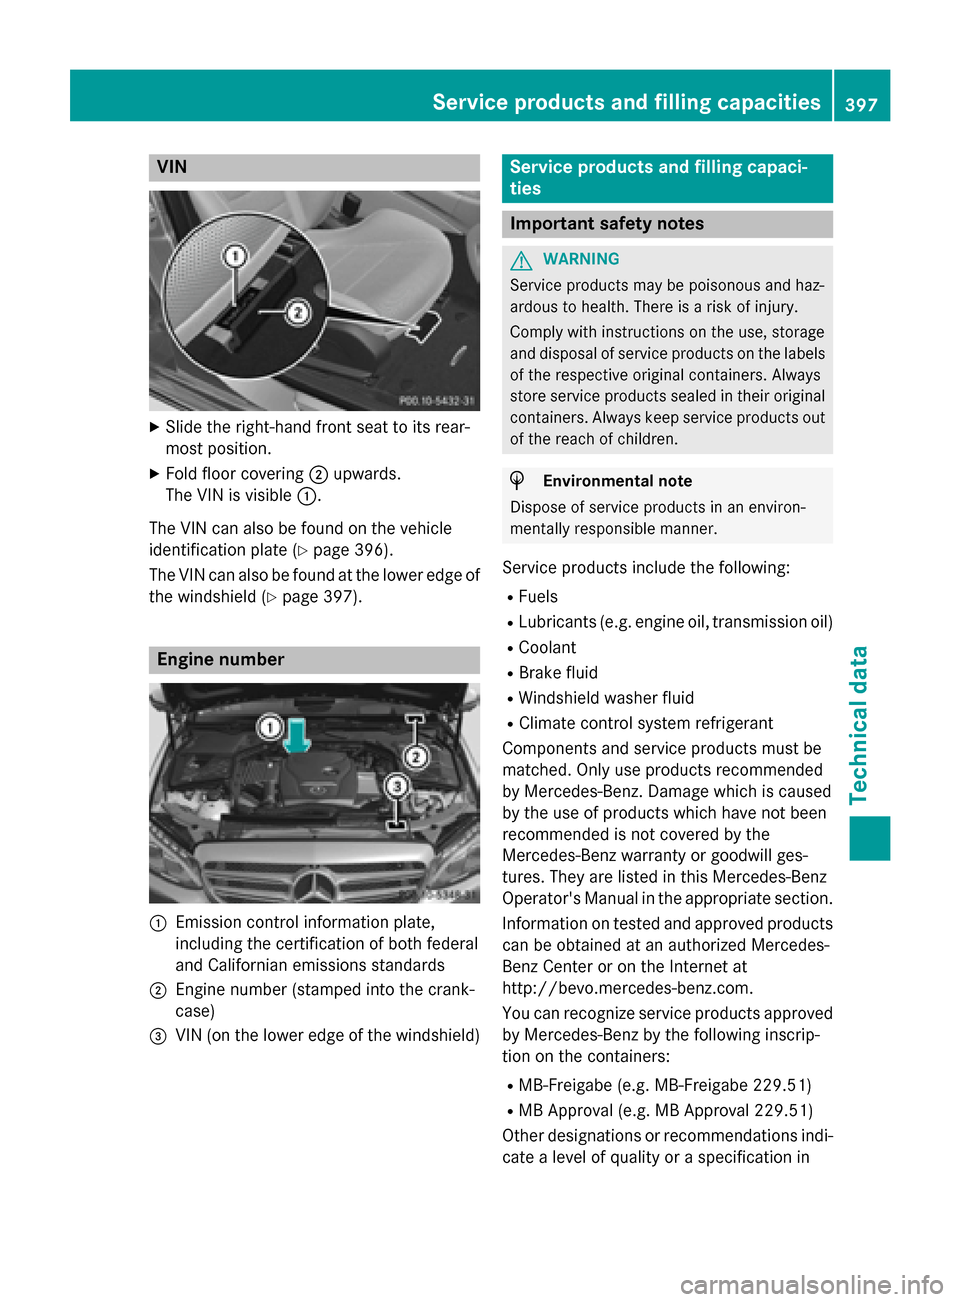 MERCEDES-BENZ C-Class SEDAN 2015 W205 User Guide VIN
X
Slide the right-hand front seat to its rear-
most position.
X Fold floor covering 0044upwards.
The VIN is visible 0043.
The VIN can also be found on the vehicle
identification plate (Y page 396)